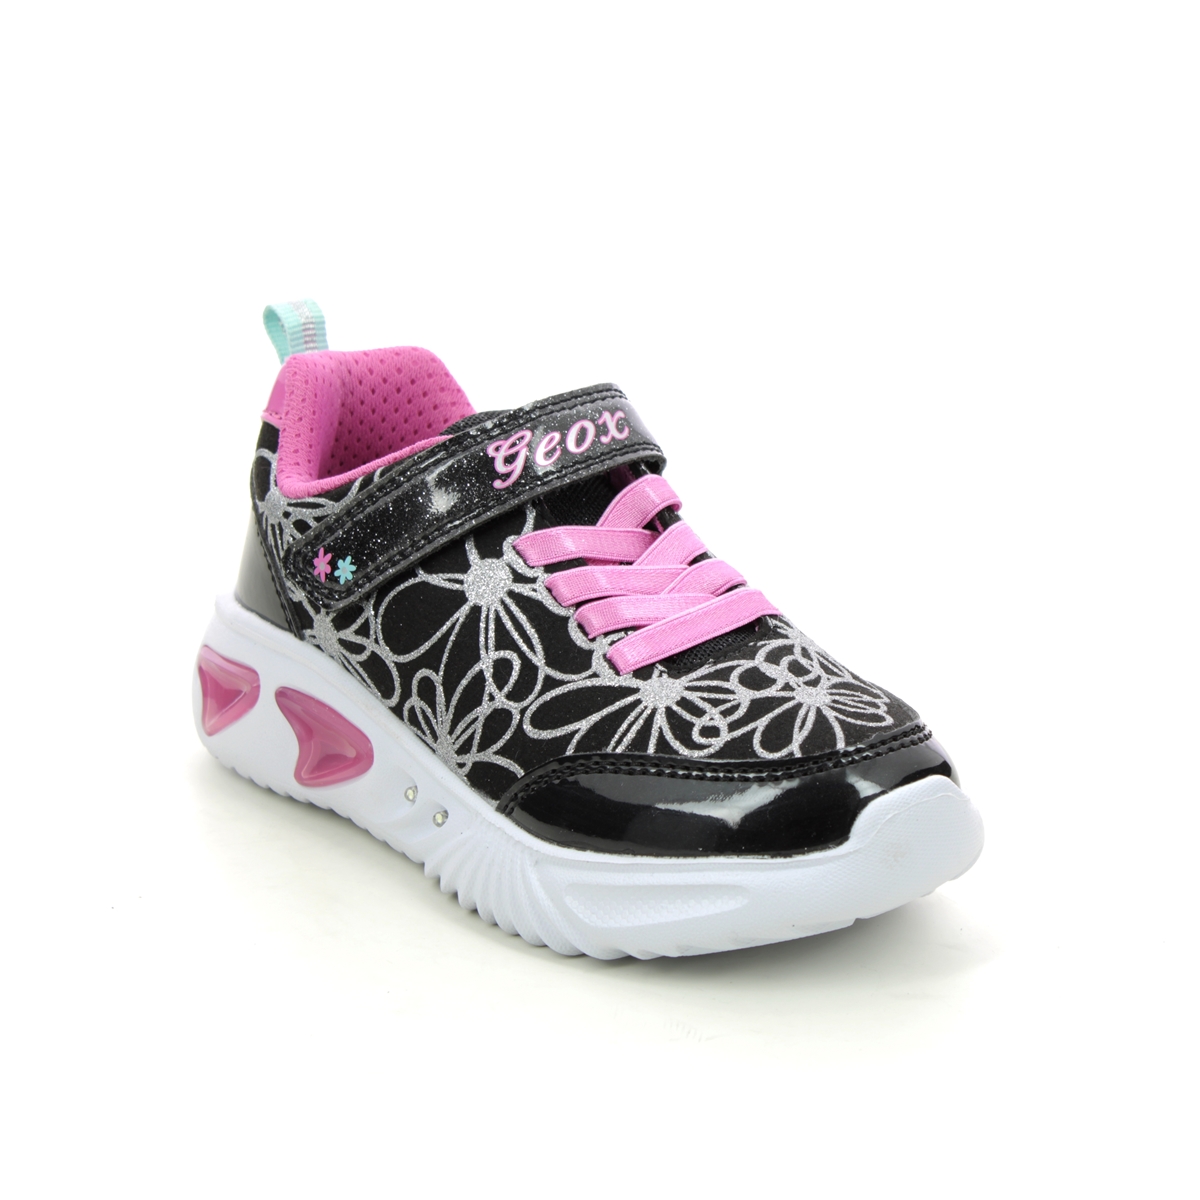 Geox - Assister Lights (Black Pink) J26E9A-C0922 In Size 31 In Plain Black Pink For kids